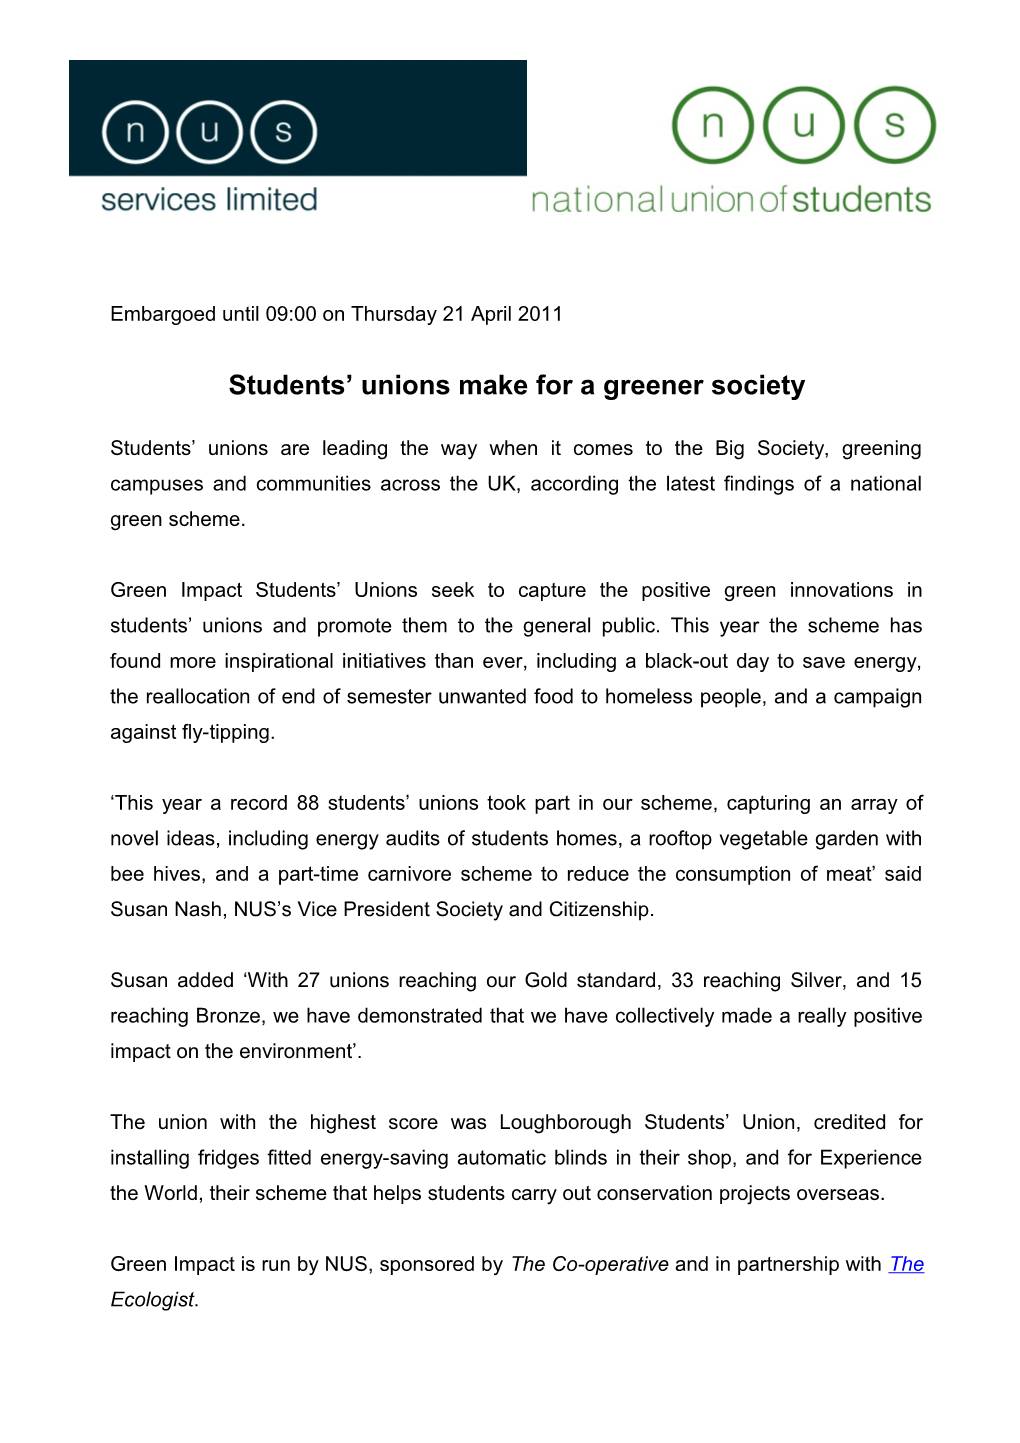 Students Unions Make for a Greener Society